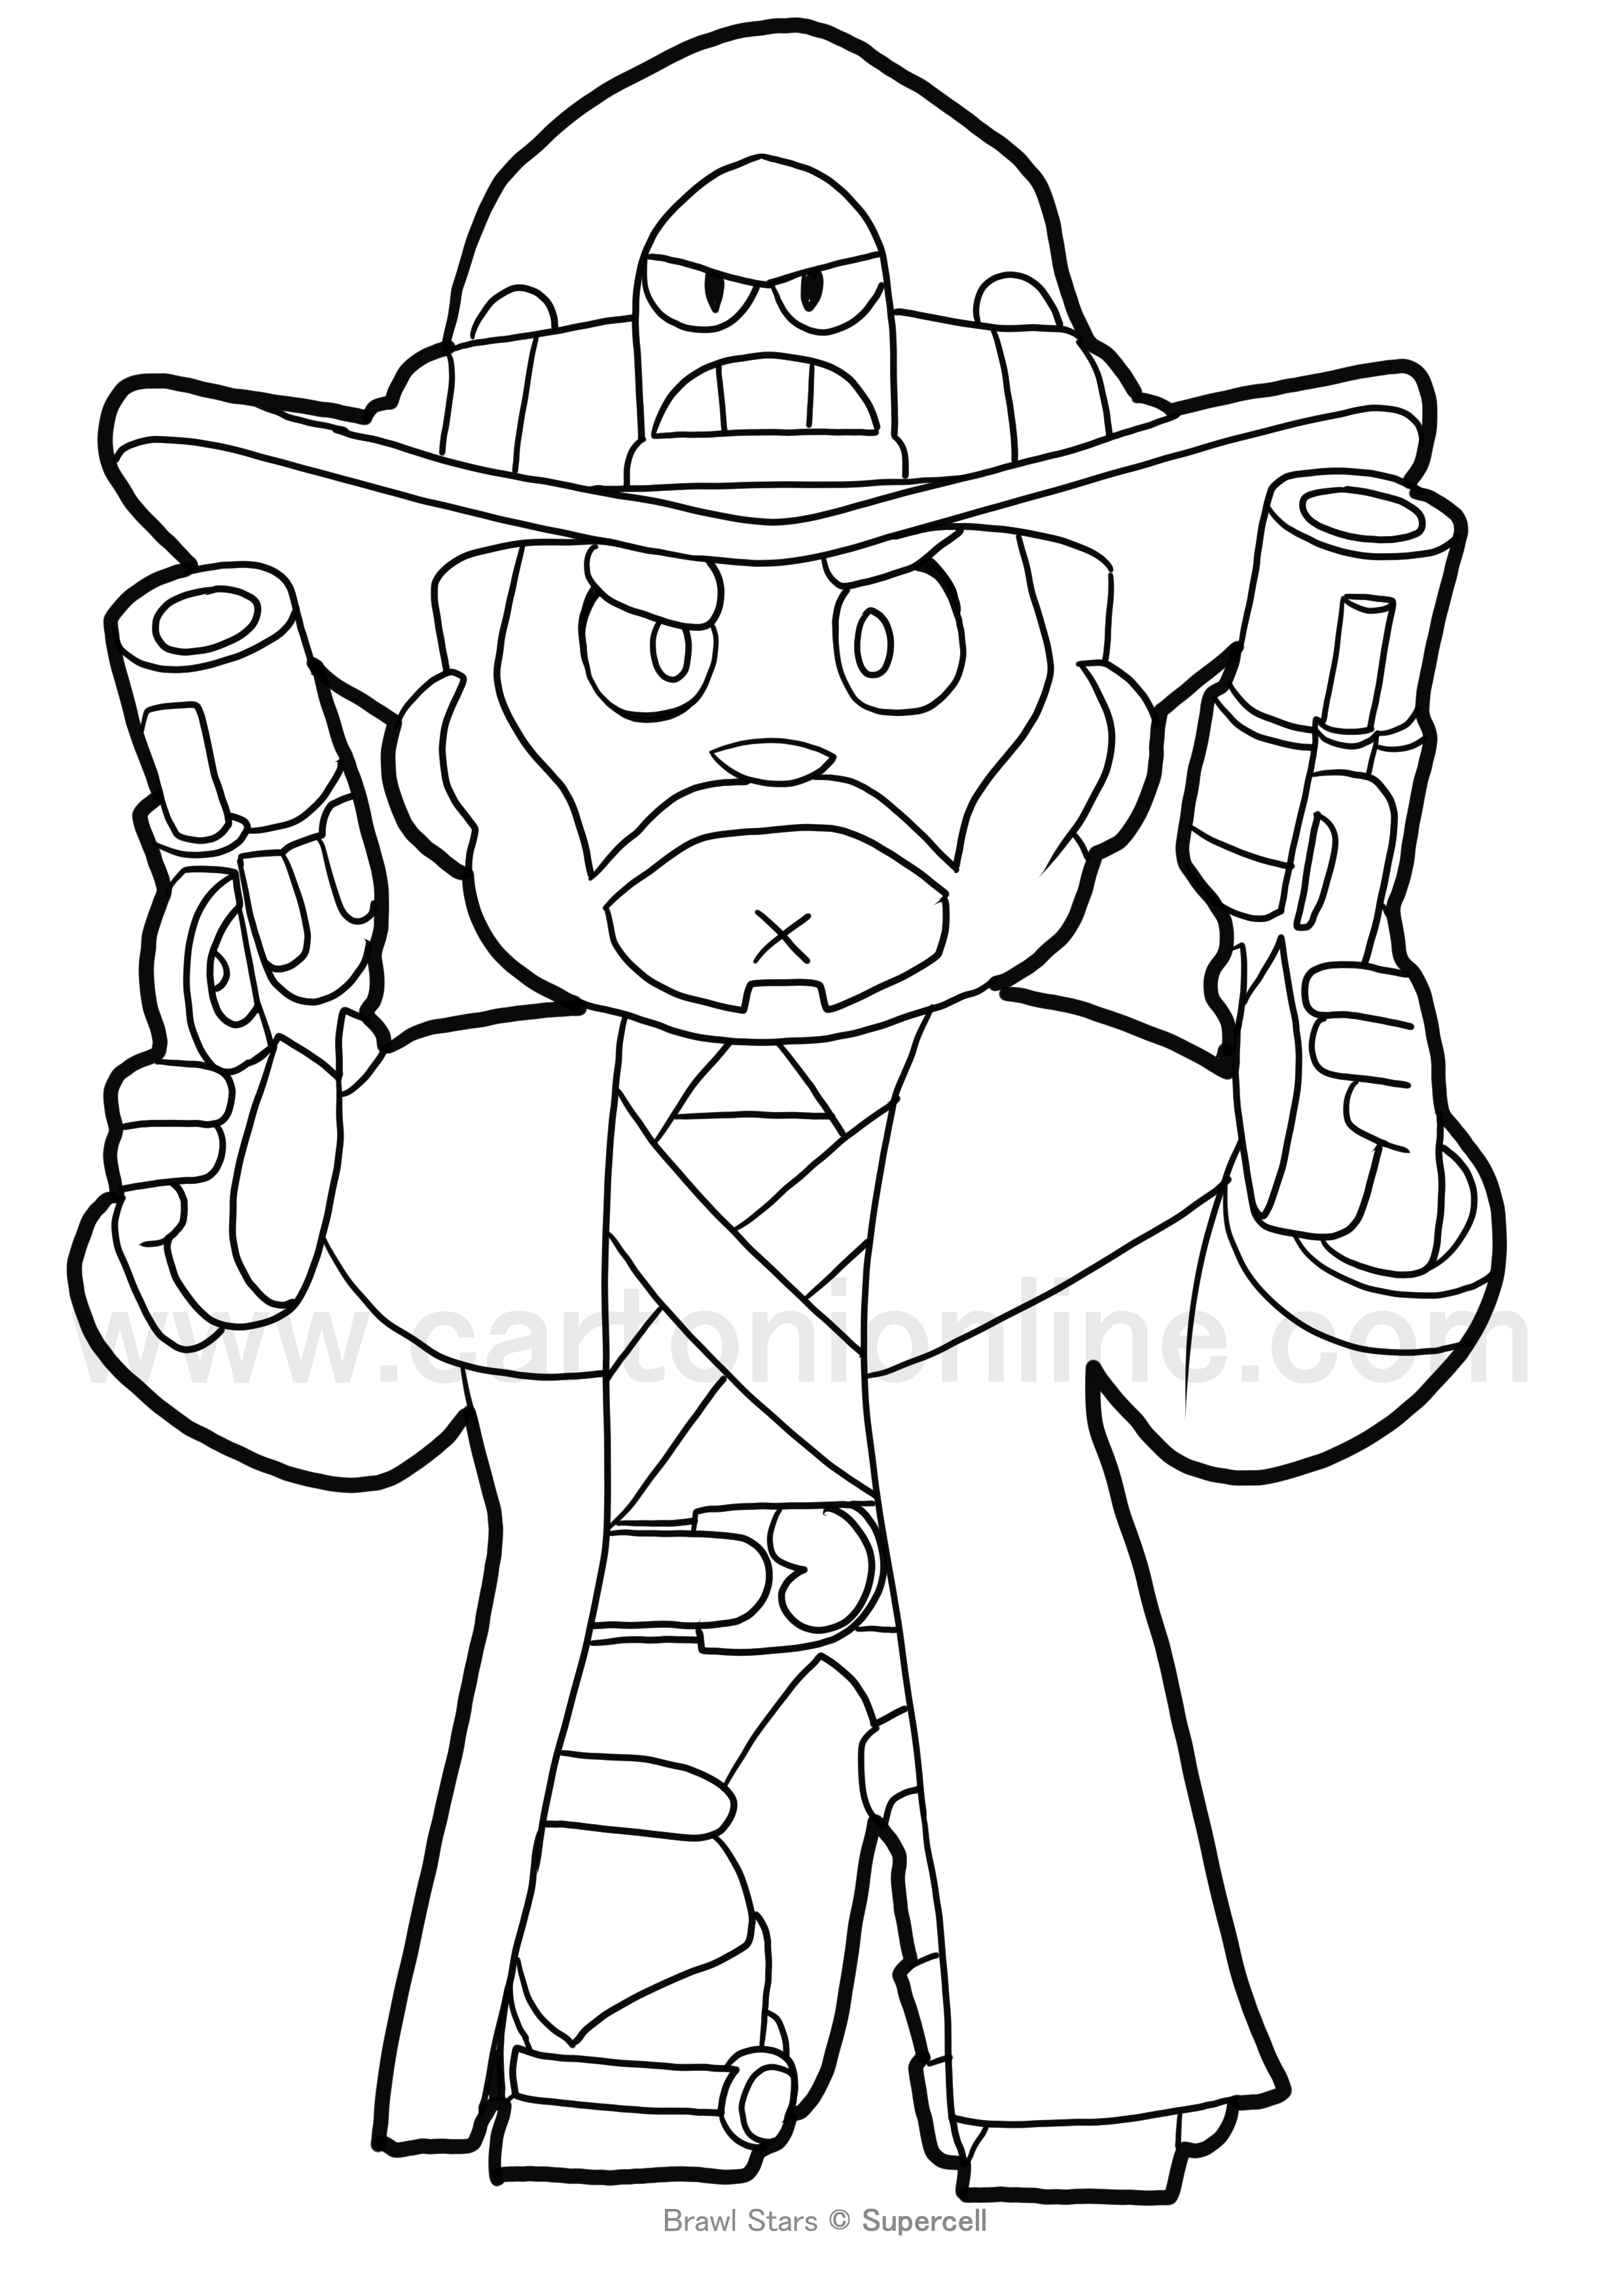 Gunslinger Colt from Brawl Stars coloring page to print and coloring